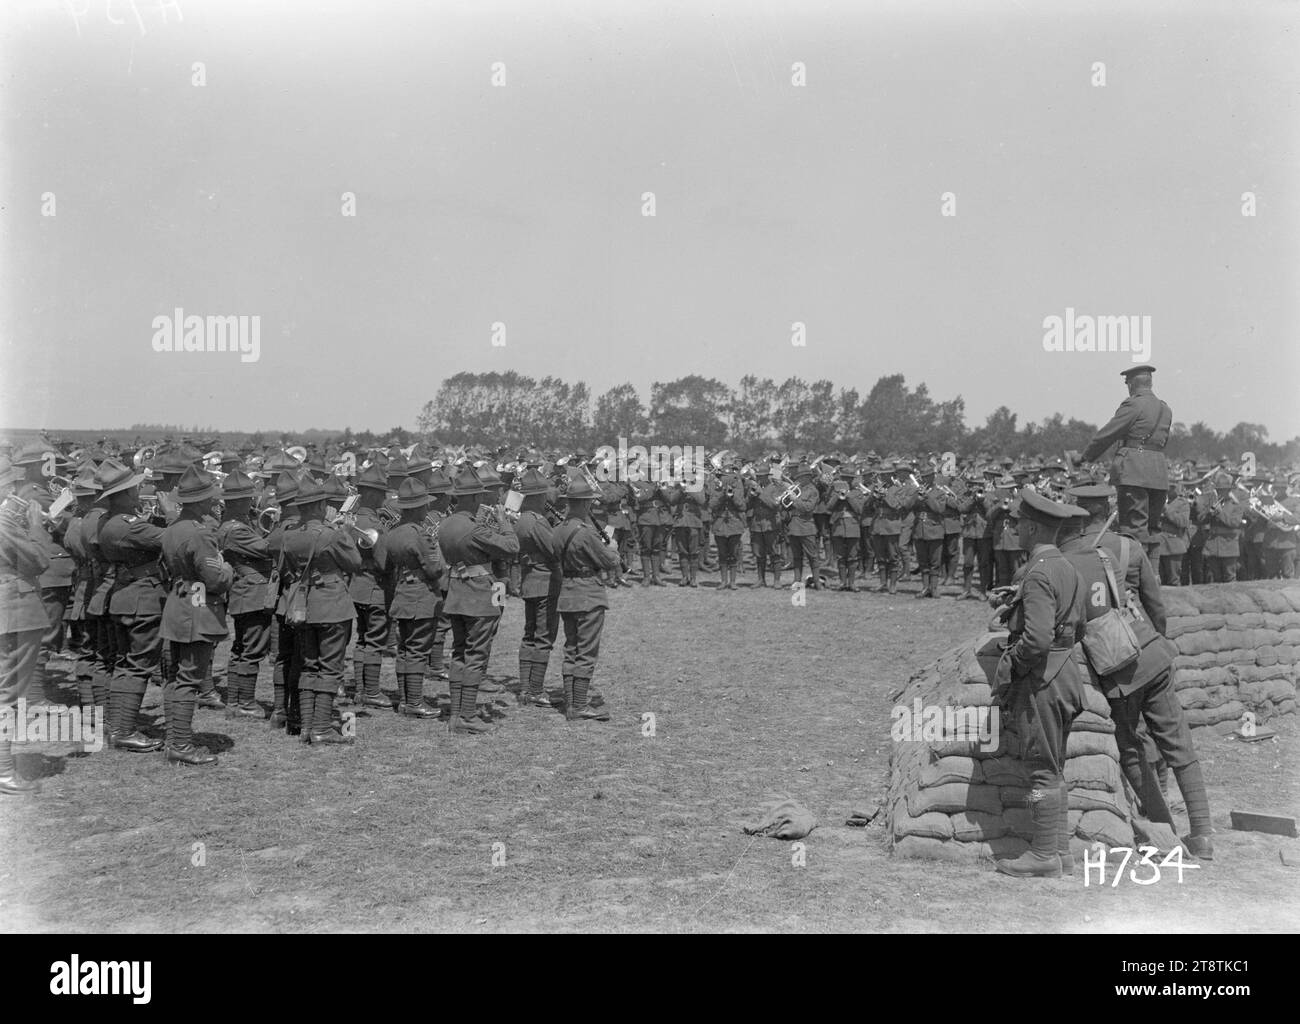 The massed bands at the New Zealand Divisional Band Contest, France, The massed bands playing at the New Zealand Divisional Band Contest in Authie, France, during World War I. Photograph taken 27 July 1918 Stock Photo